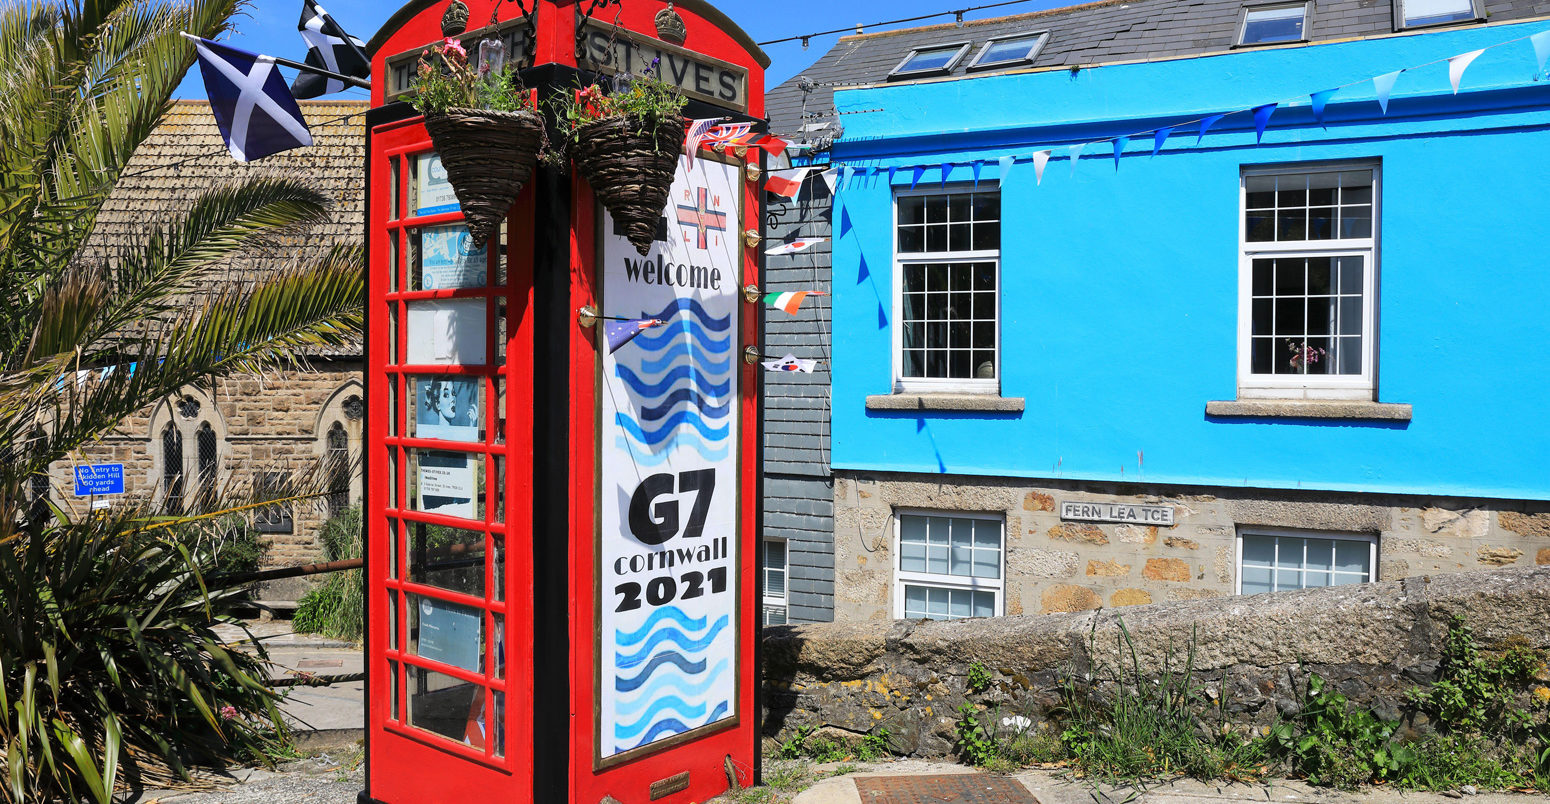 Red phone box in St Ives, decorated to welcome the G7 summit to Cornwall